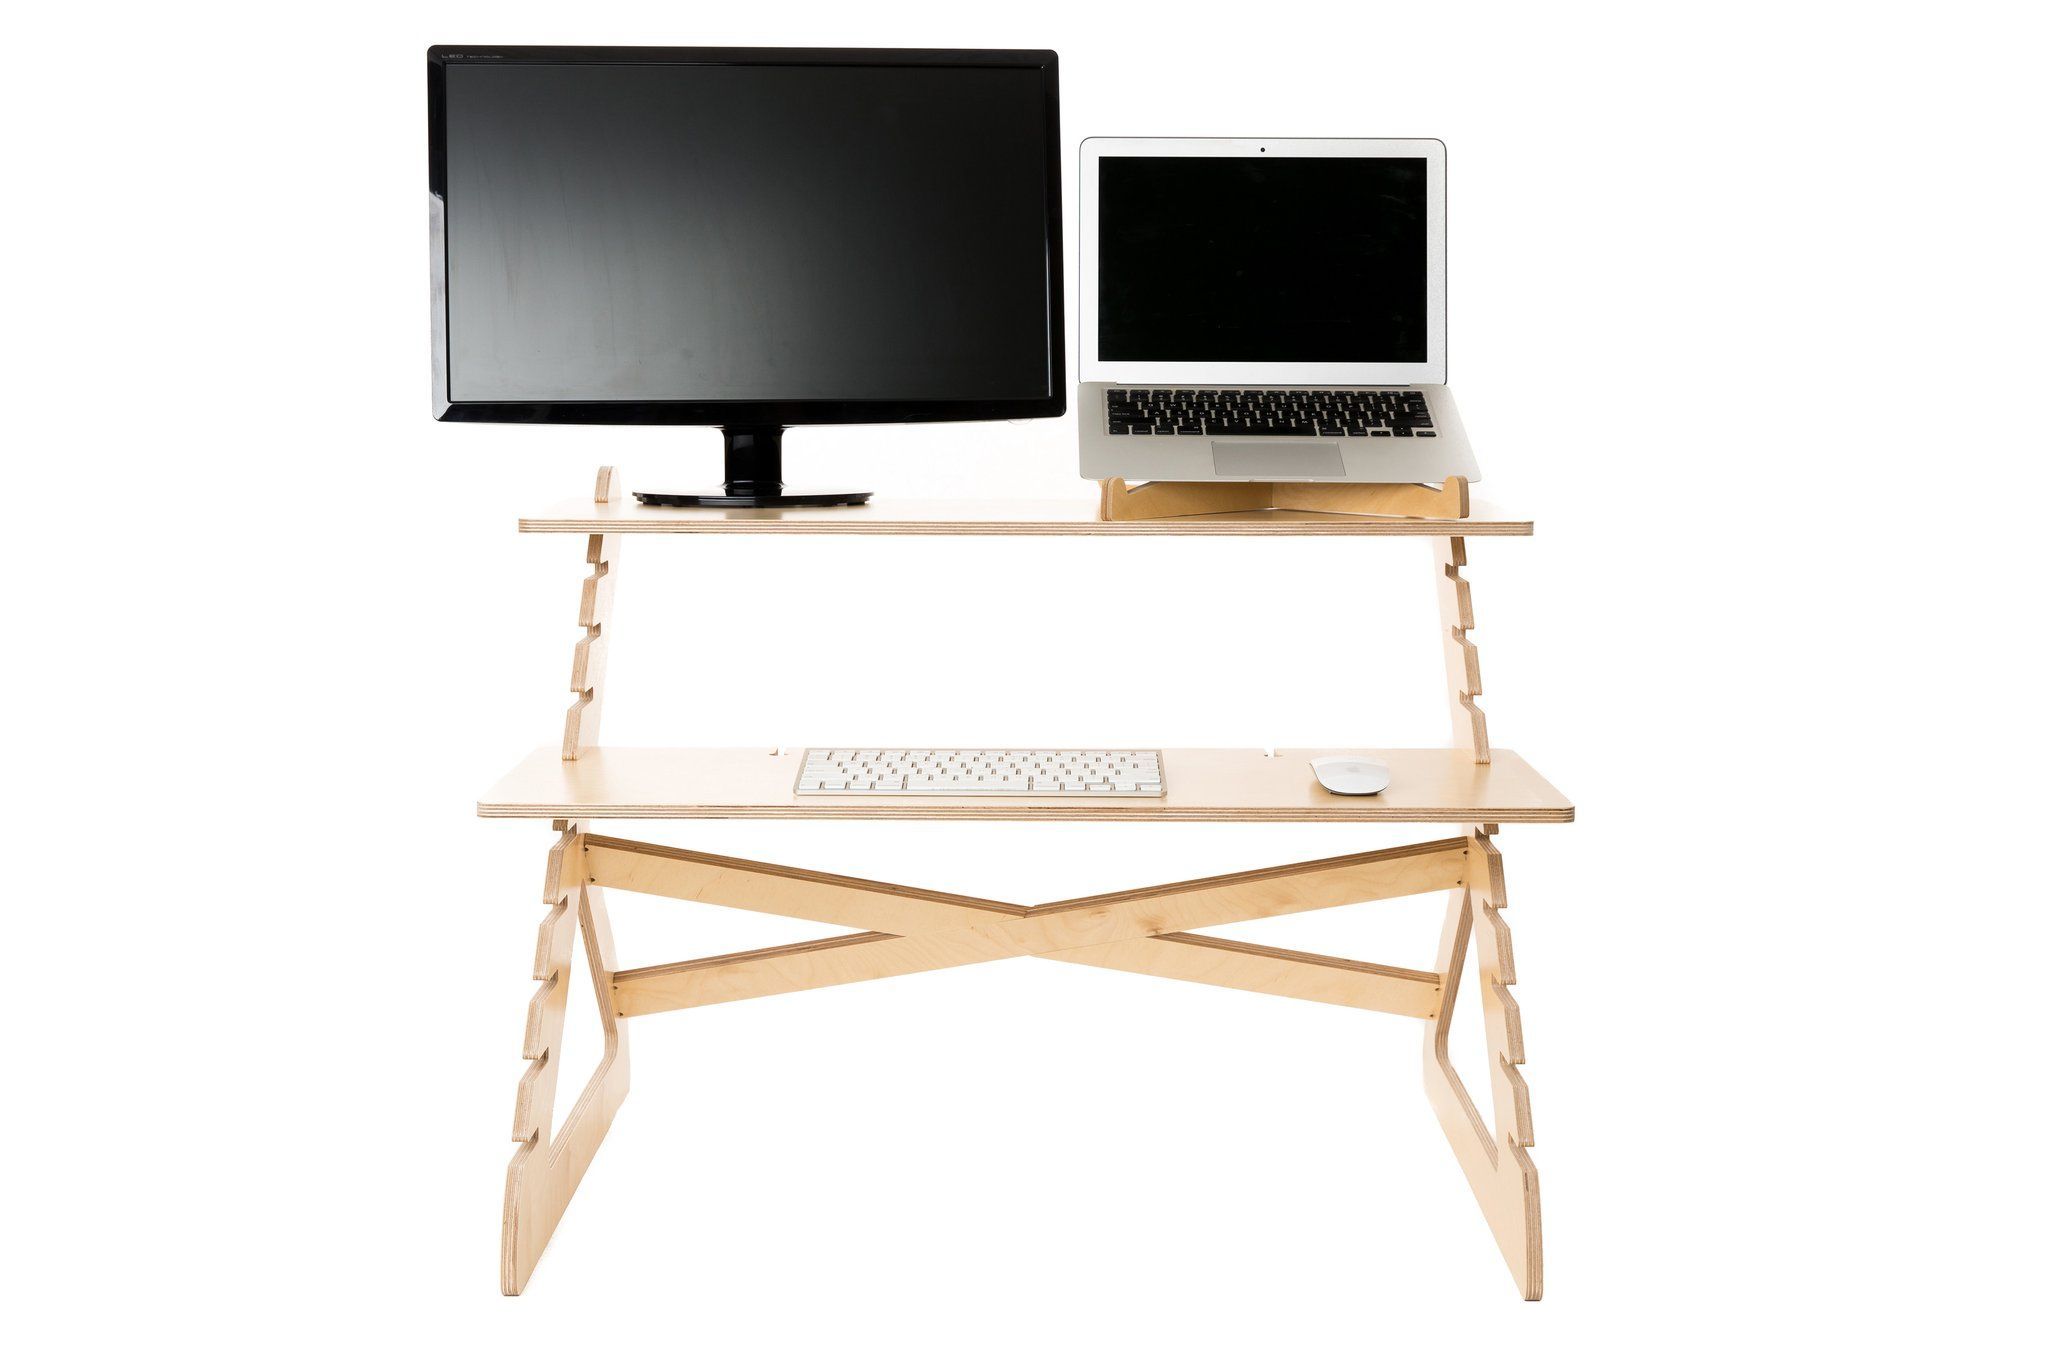 Value Combo-Readydesk 2-Laptop stand included -   25 simple crafts desk
 ideas